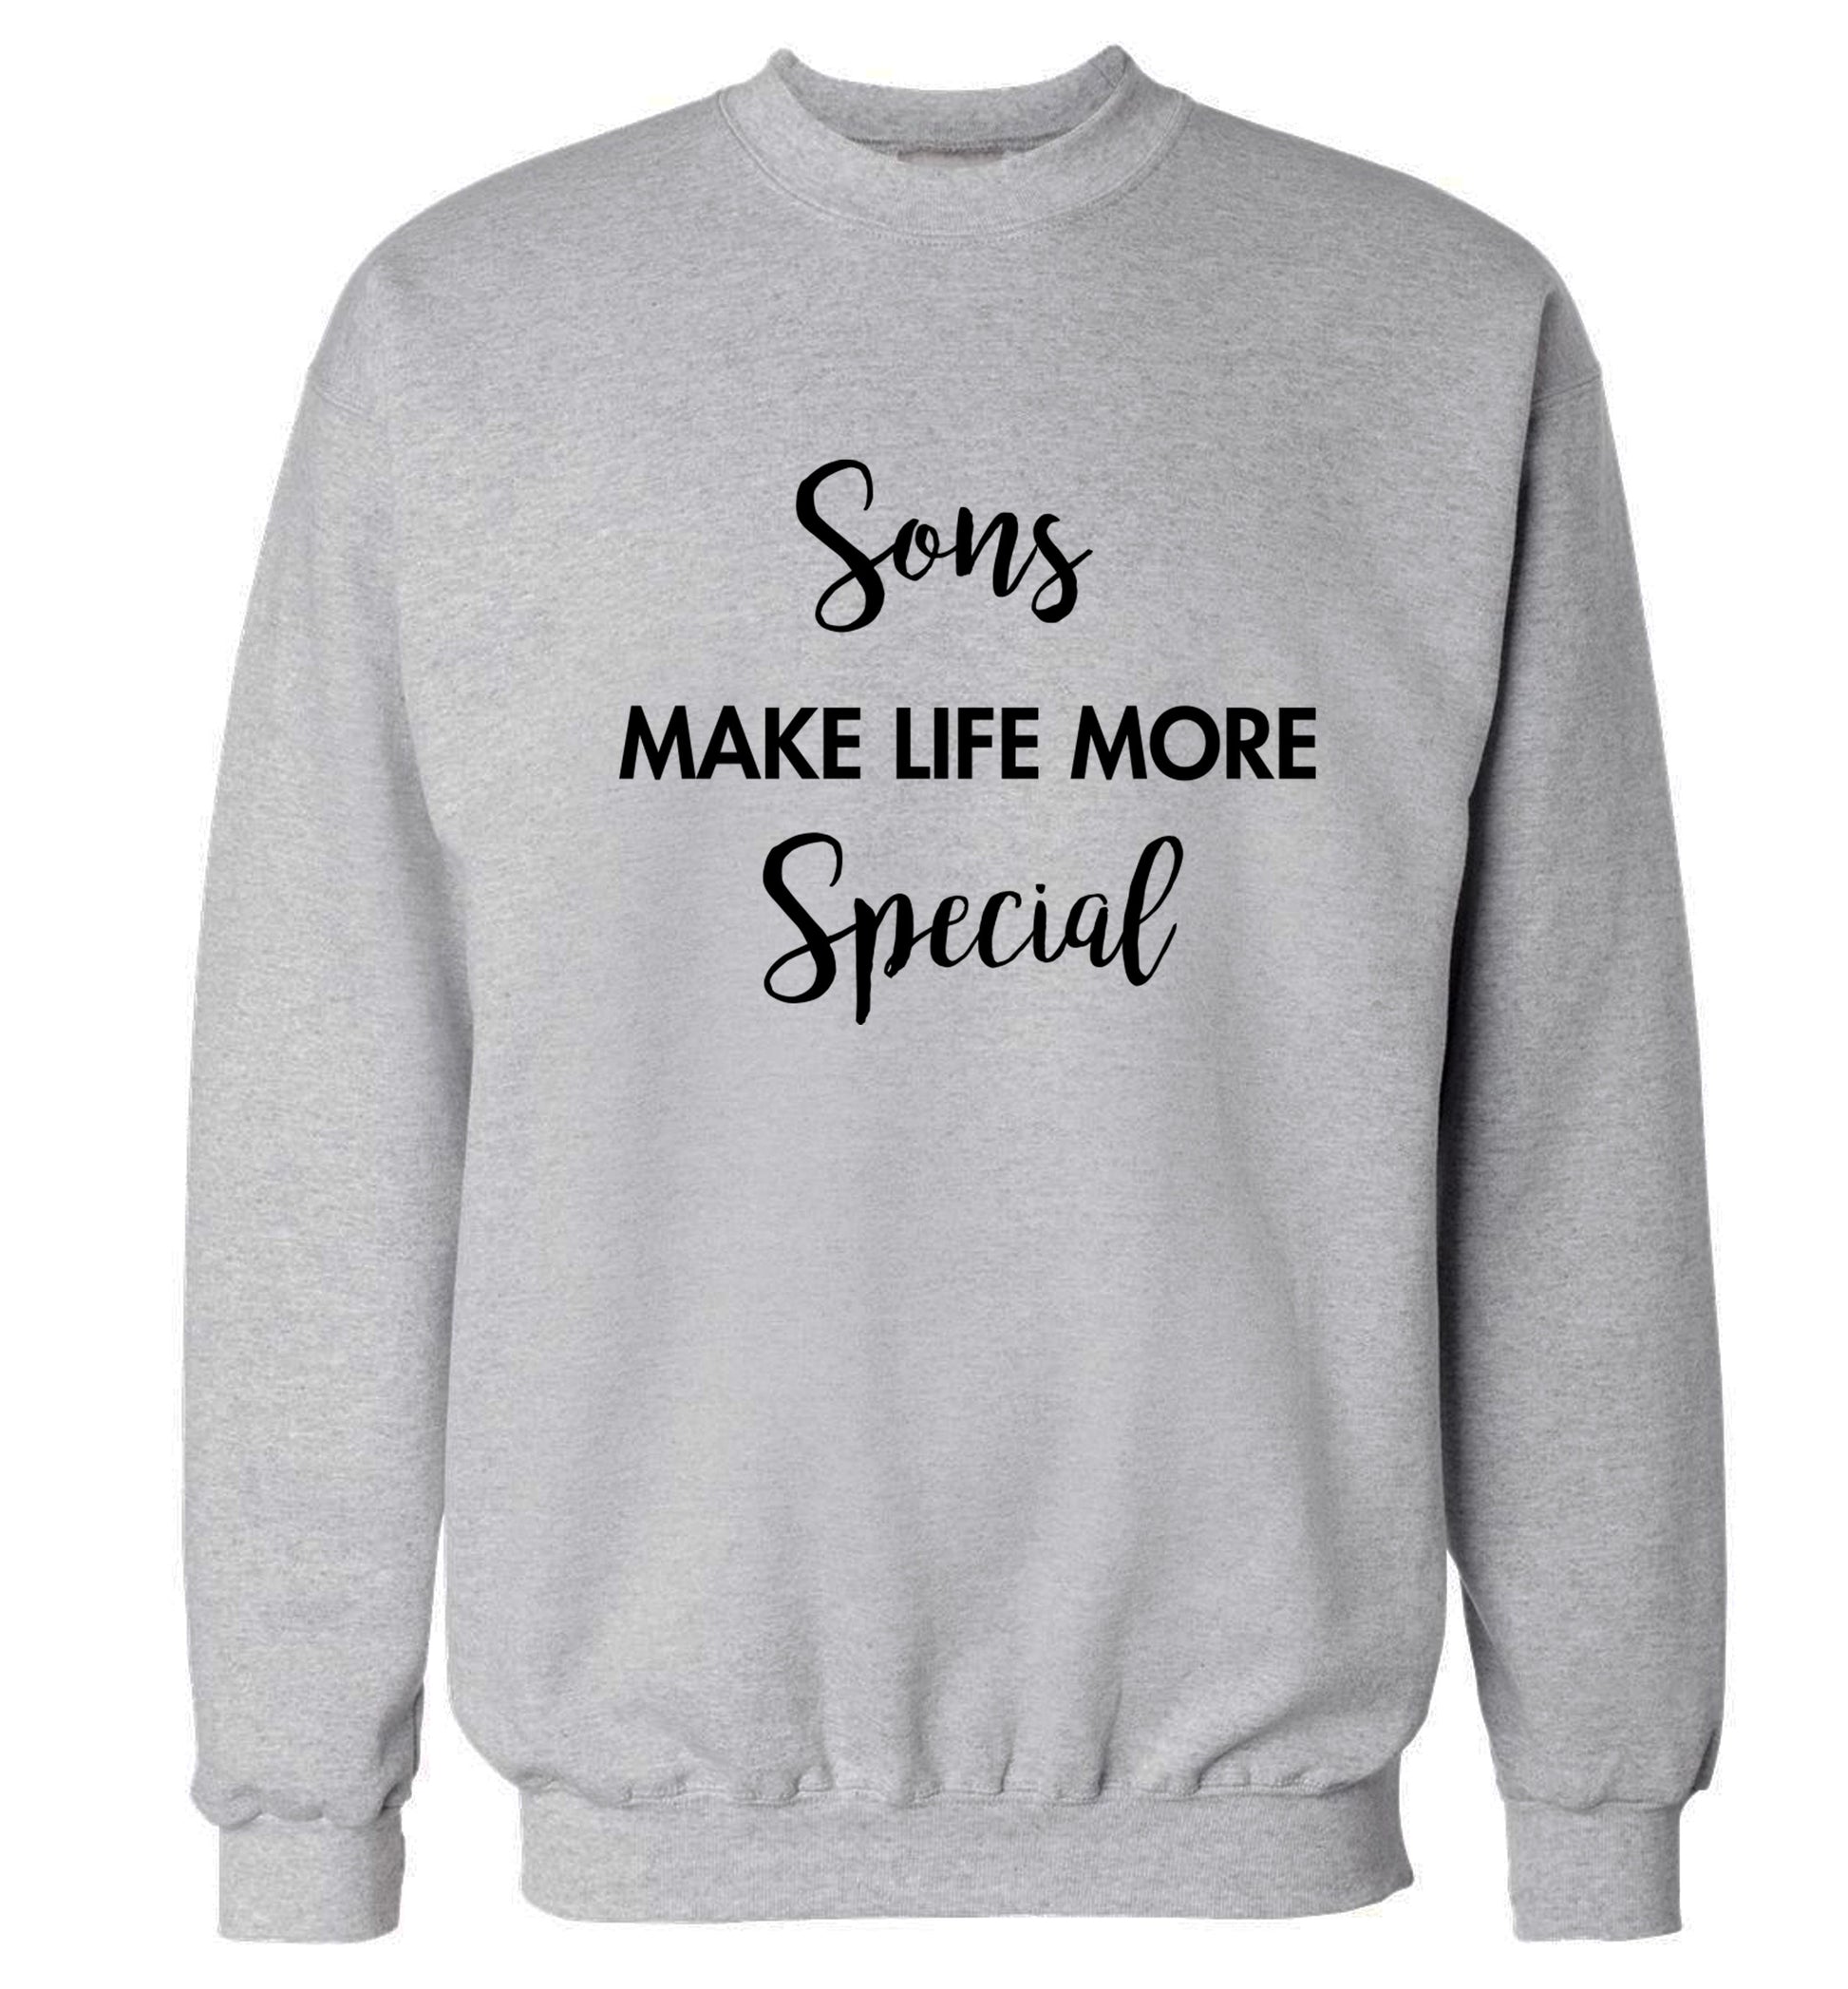 Sons make life more special Adult's unisex grey Sweater 2XL